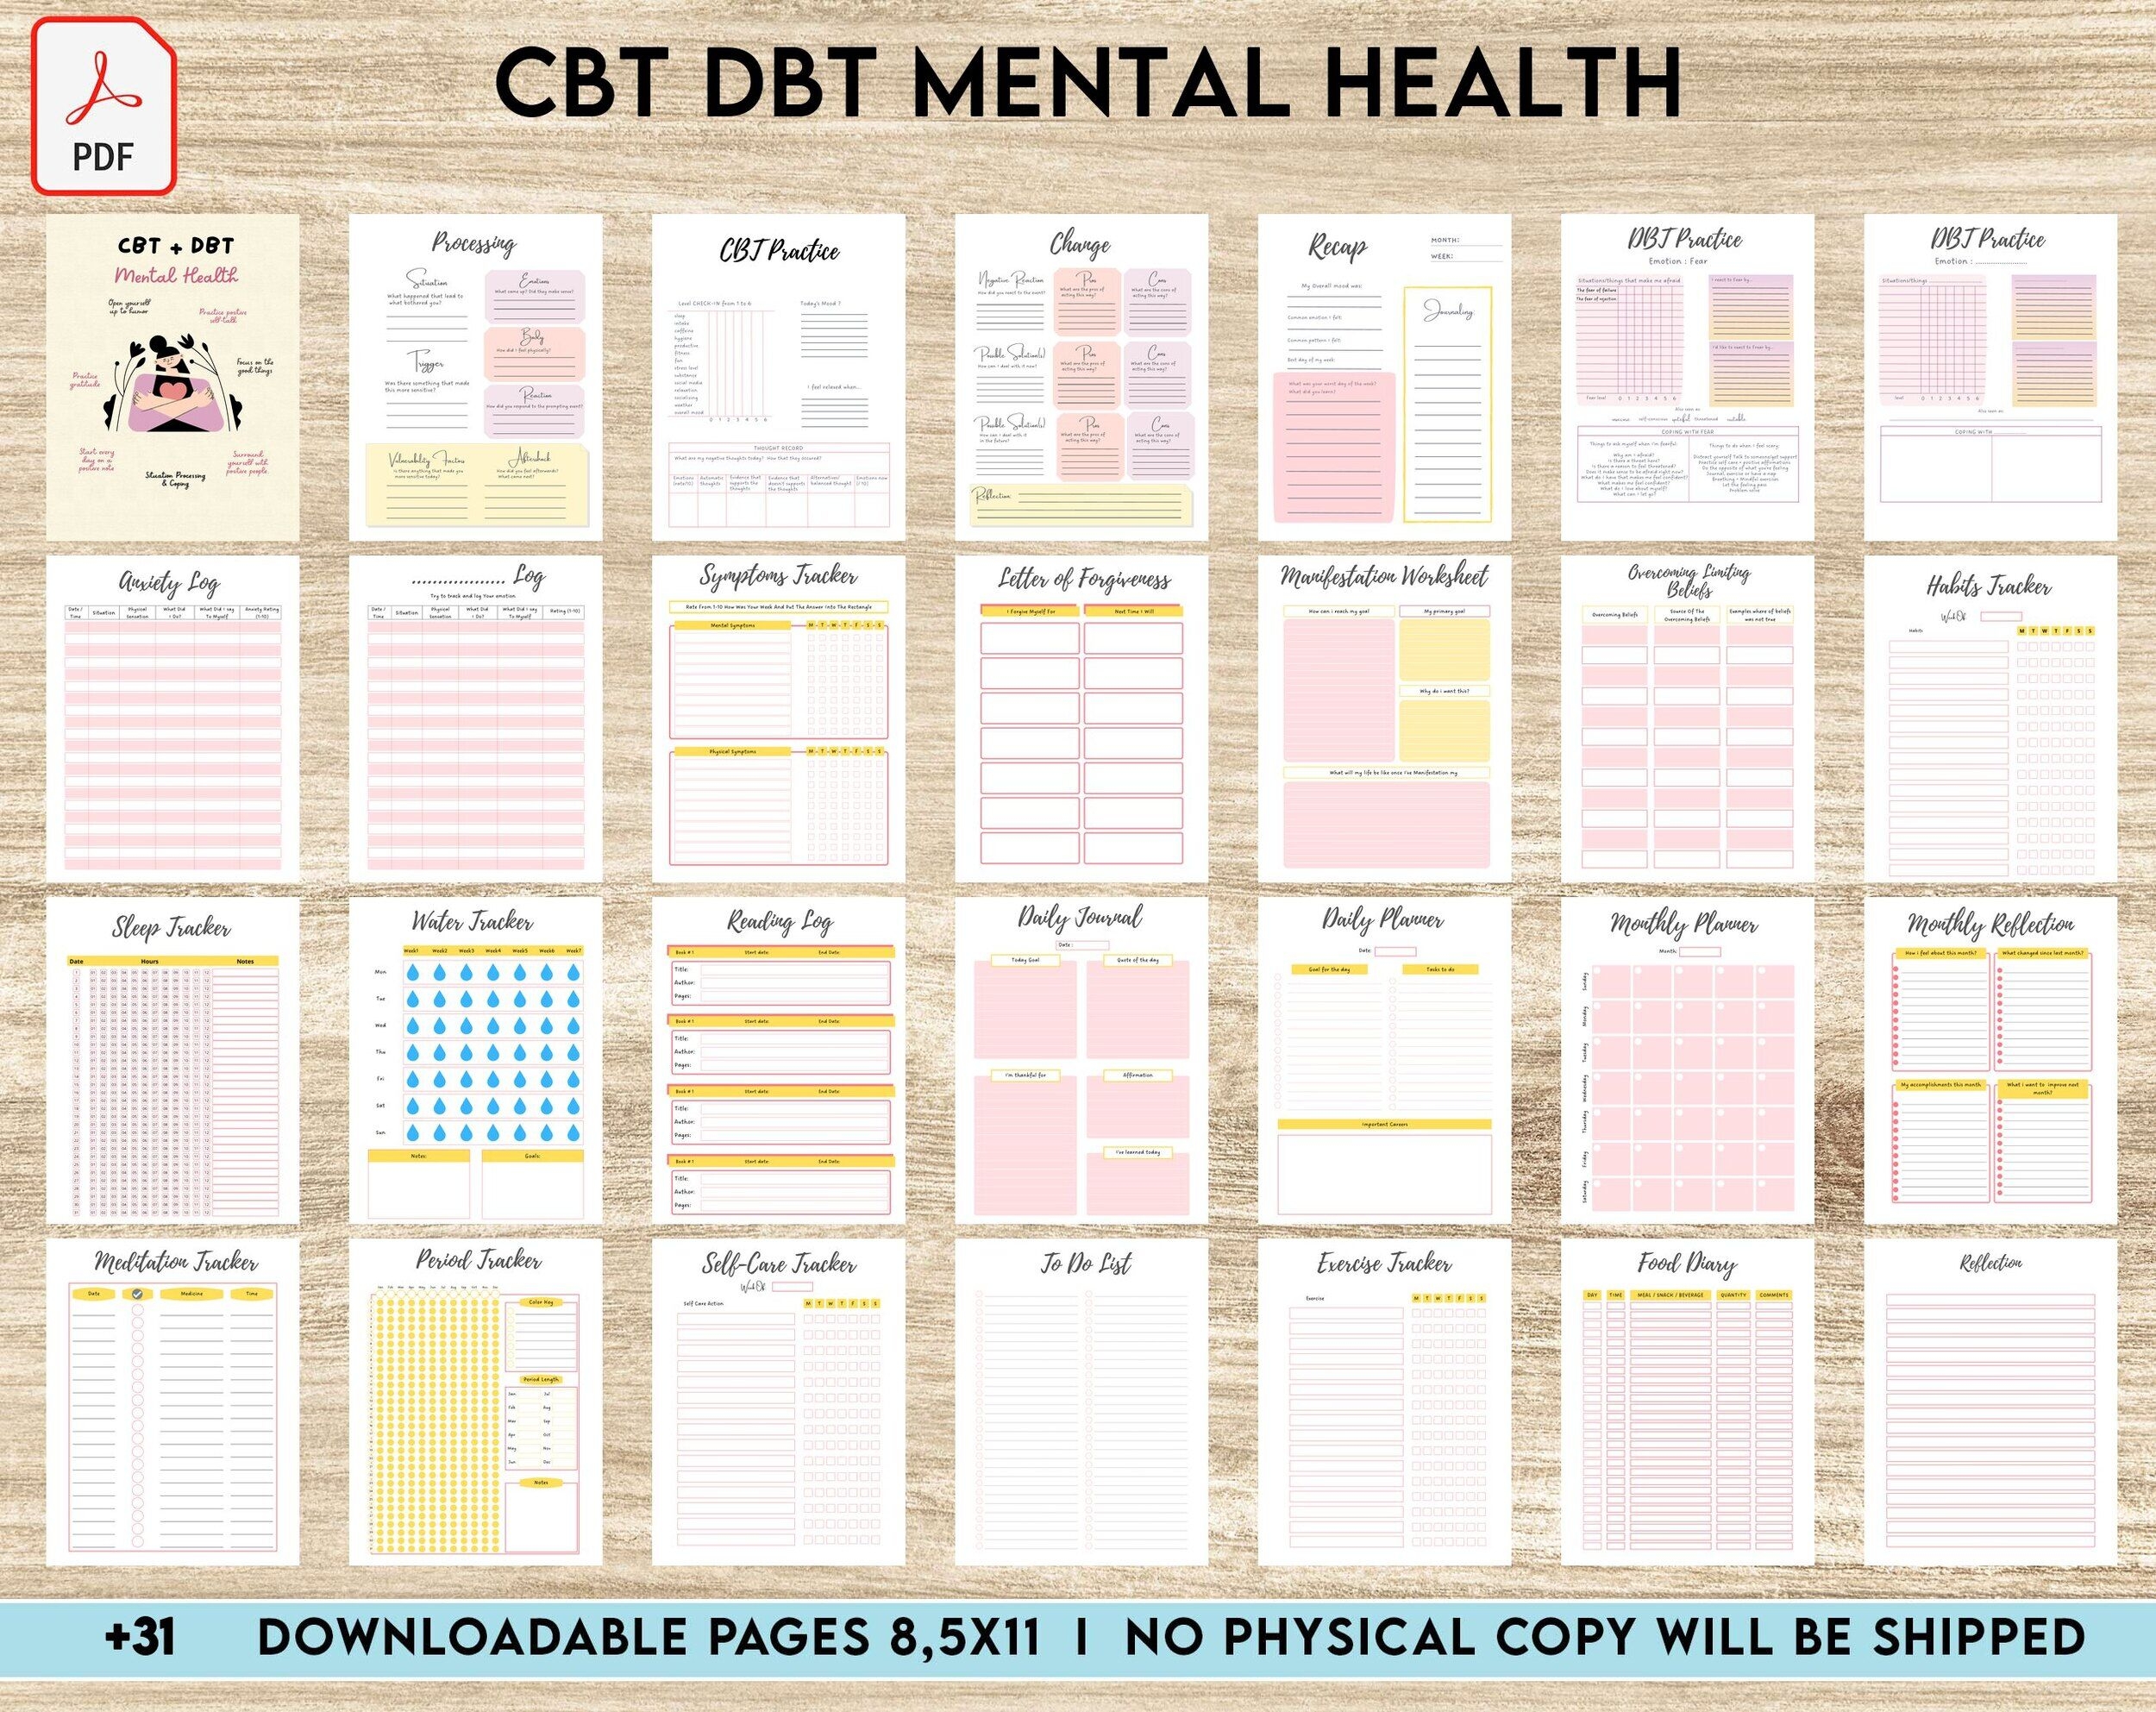 CBT DBT Mental Health Journal Worksheets Situation Processing Coping CBT DBT Therapy PDF Printable 8 5x11 A4 Size Planners Weekly